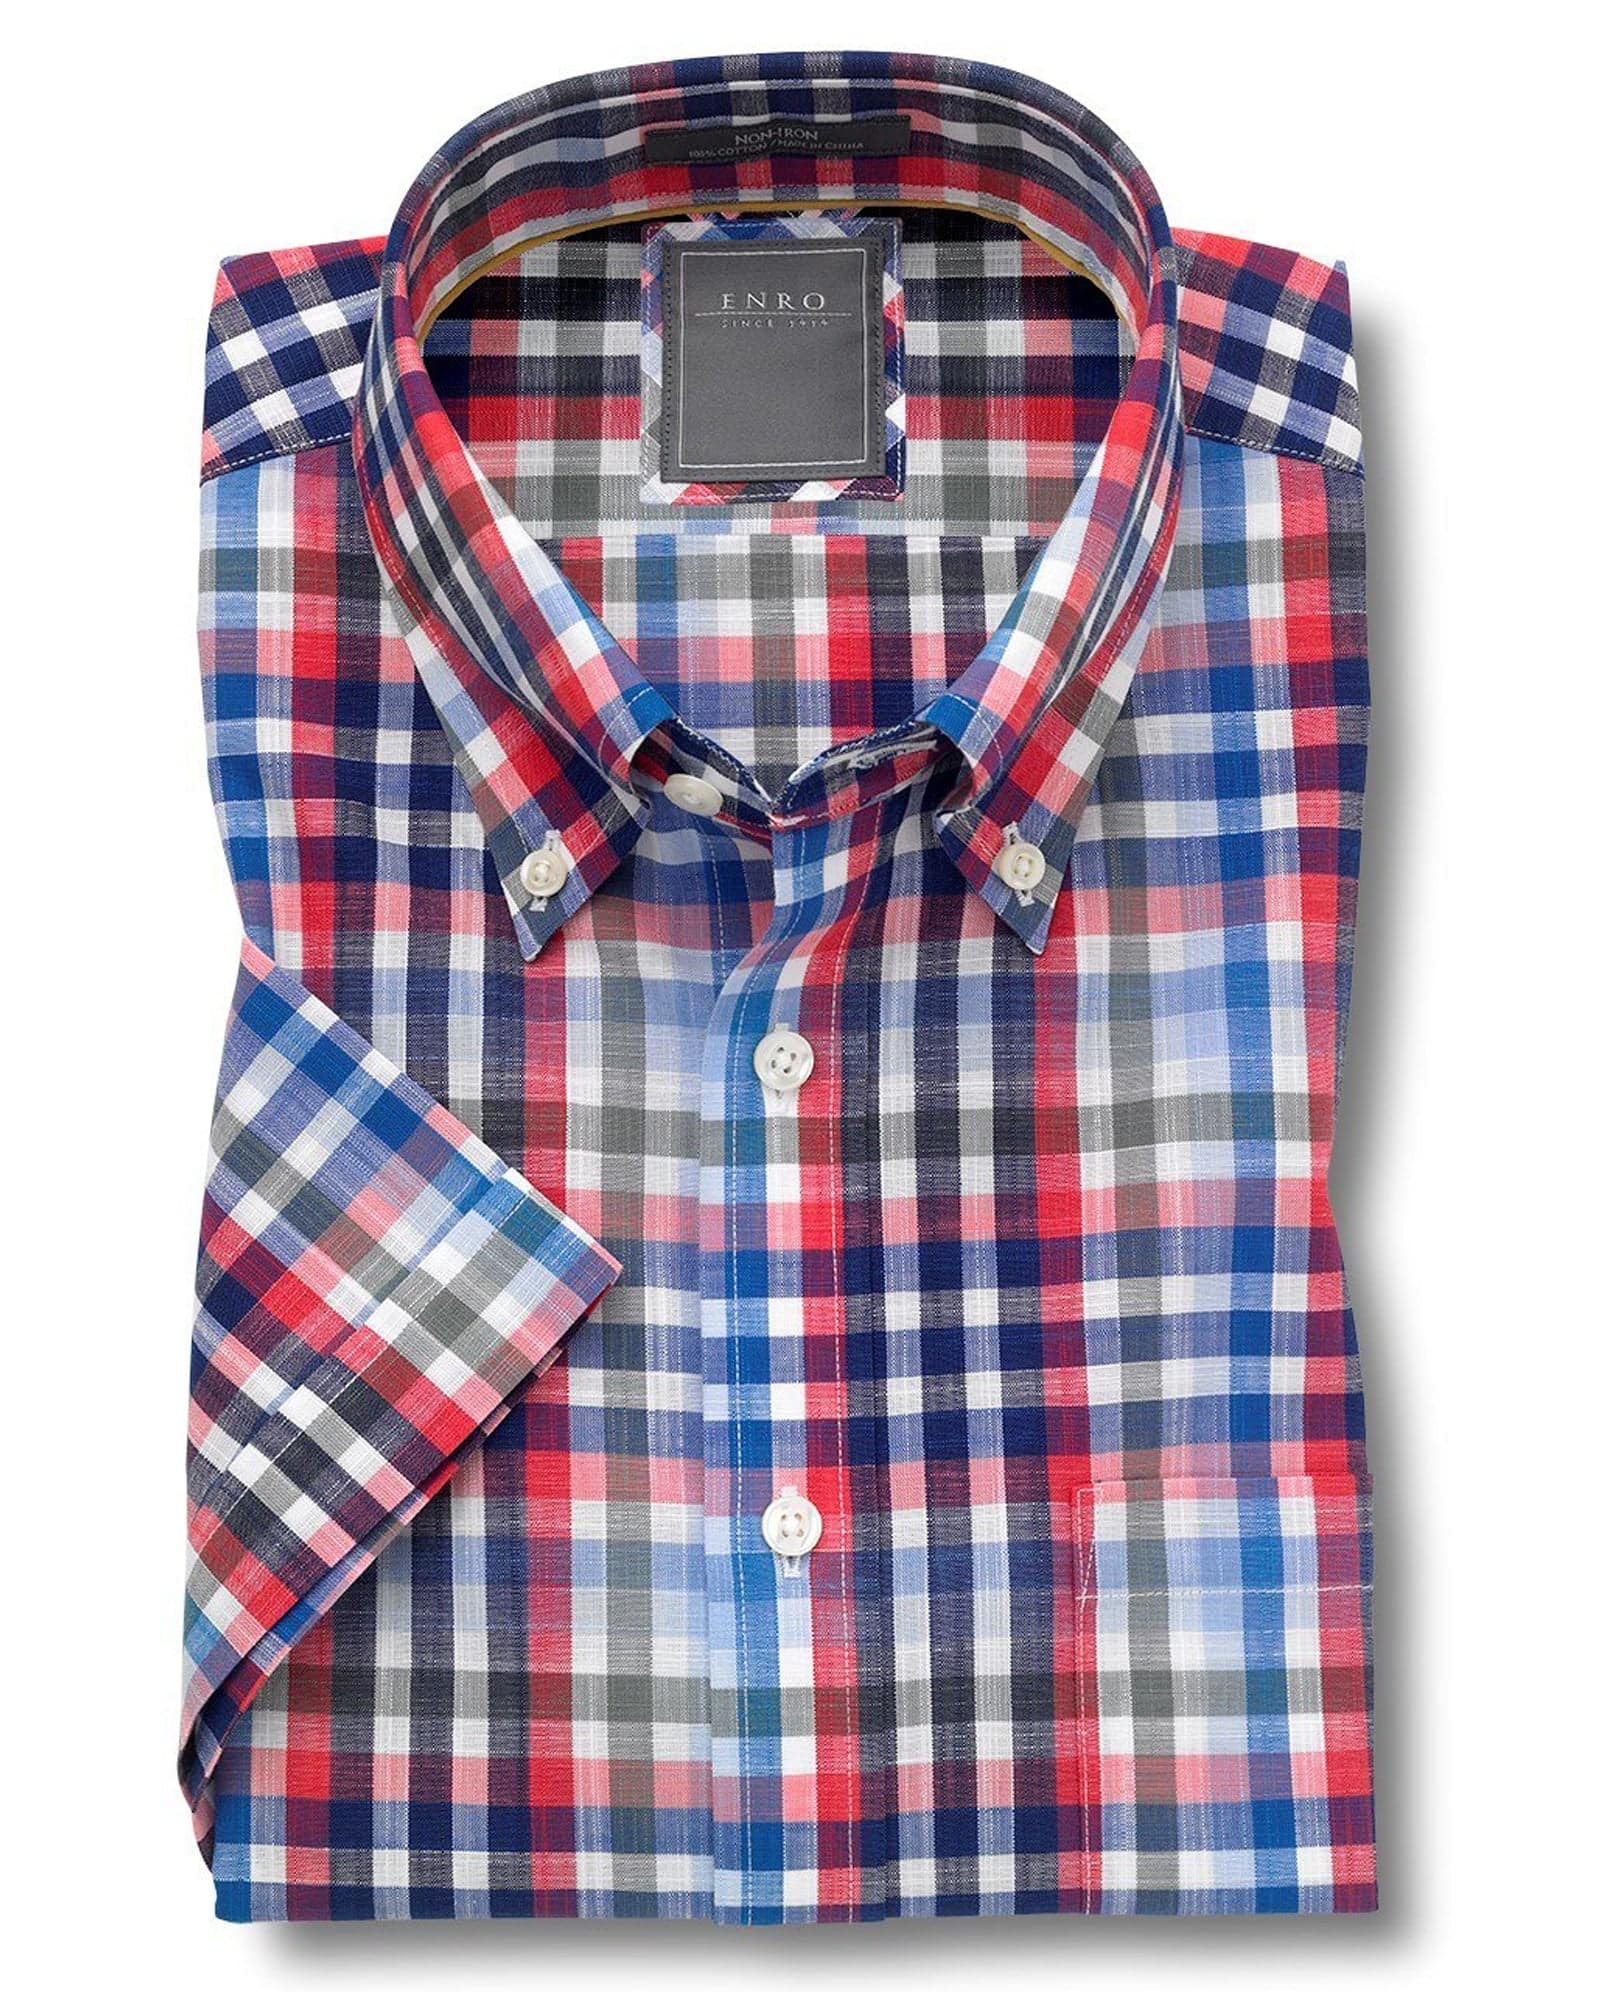 Enro Red & Blue Check Short Sleeve Button Up Shirt - Rainwater's Men's Clothing and Tuxedo Rental